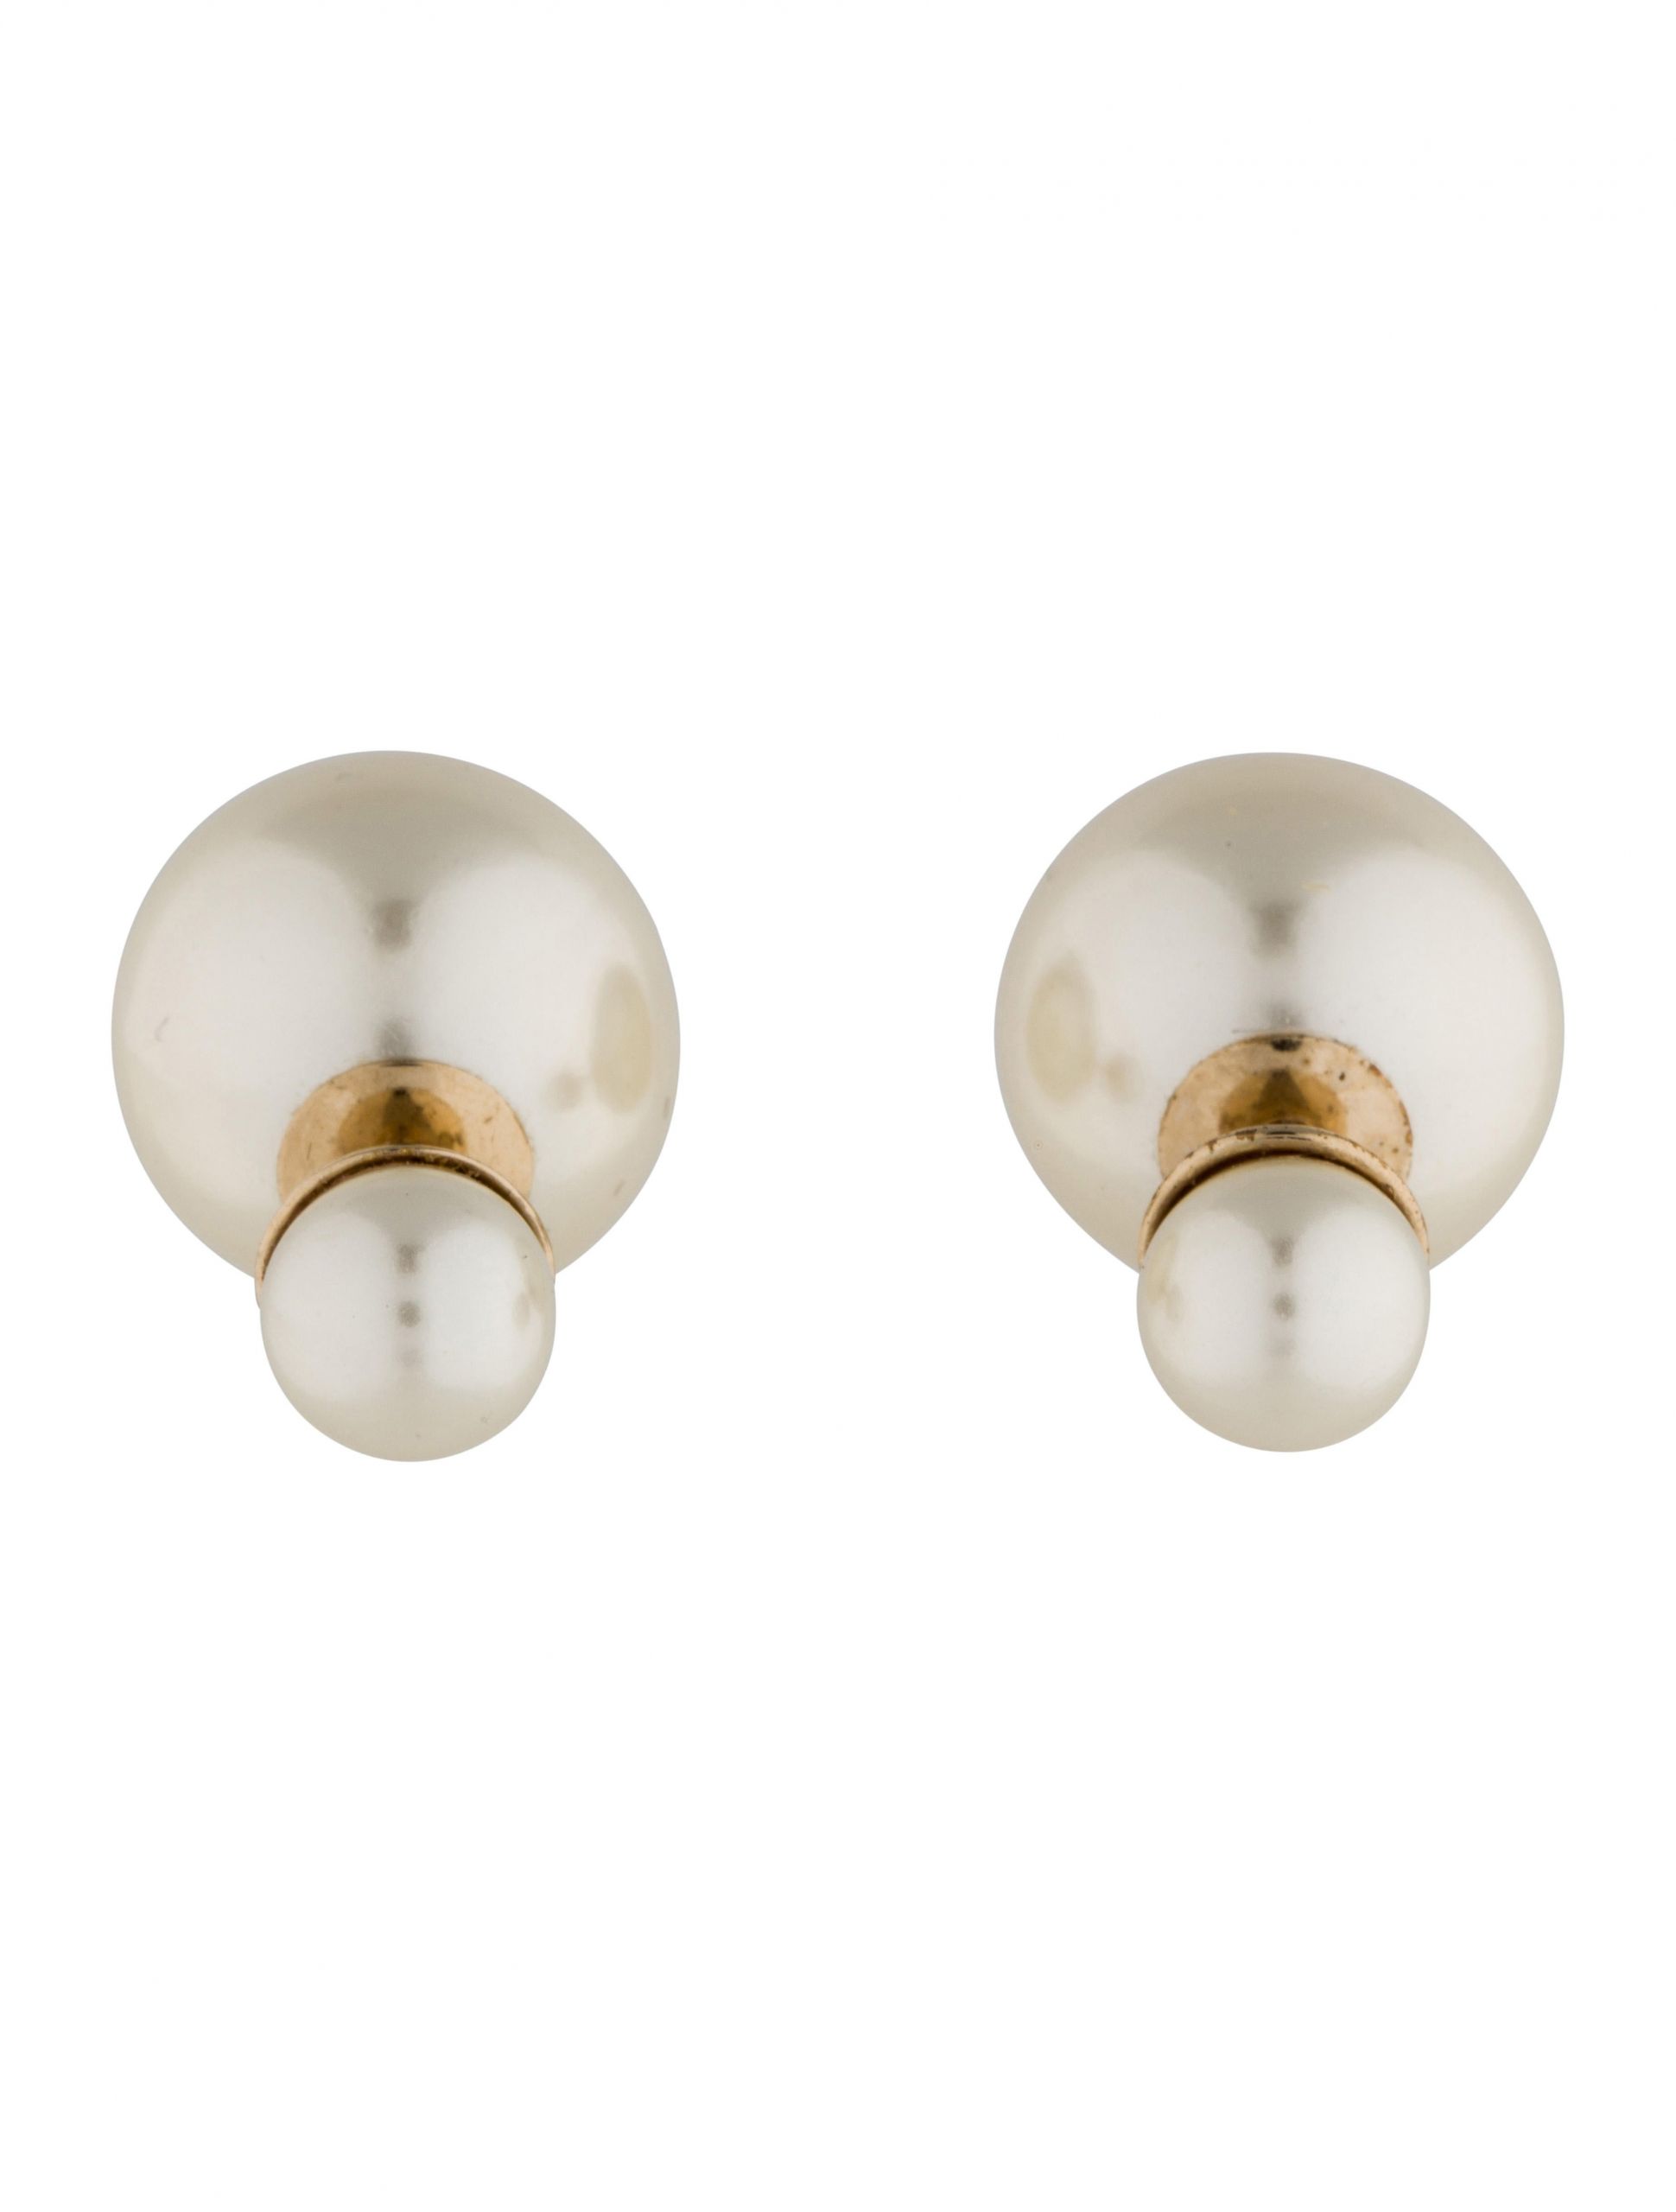 Dior Double Pearl Earrings
 Christian Dior Mise En Dior Tribal Double Pearl Earrings